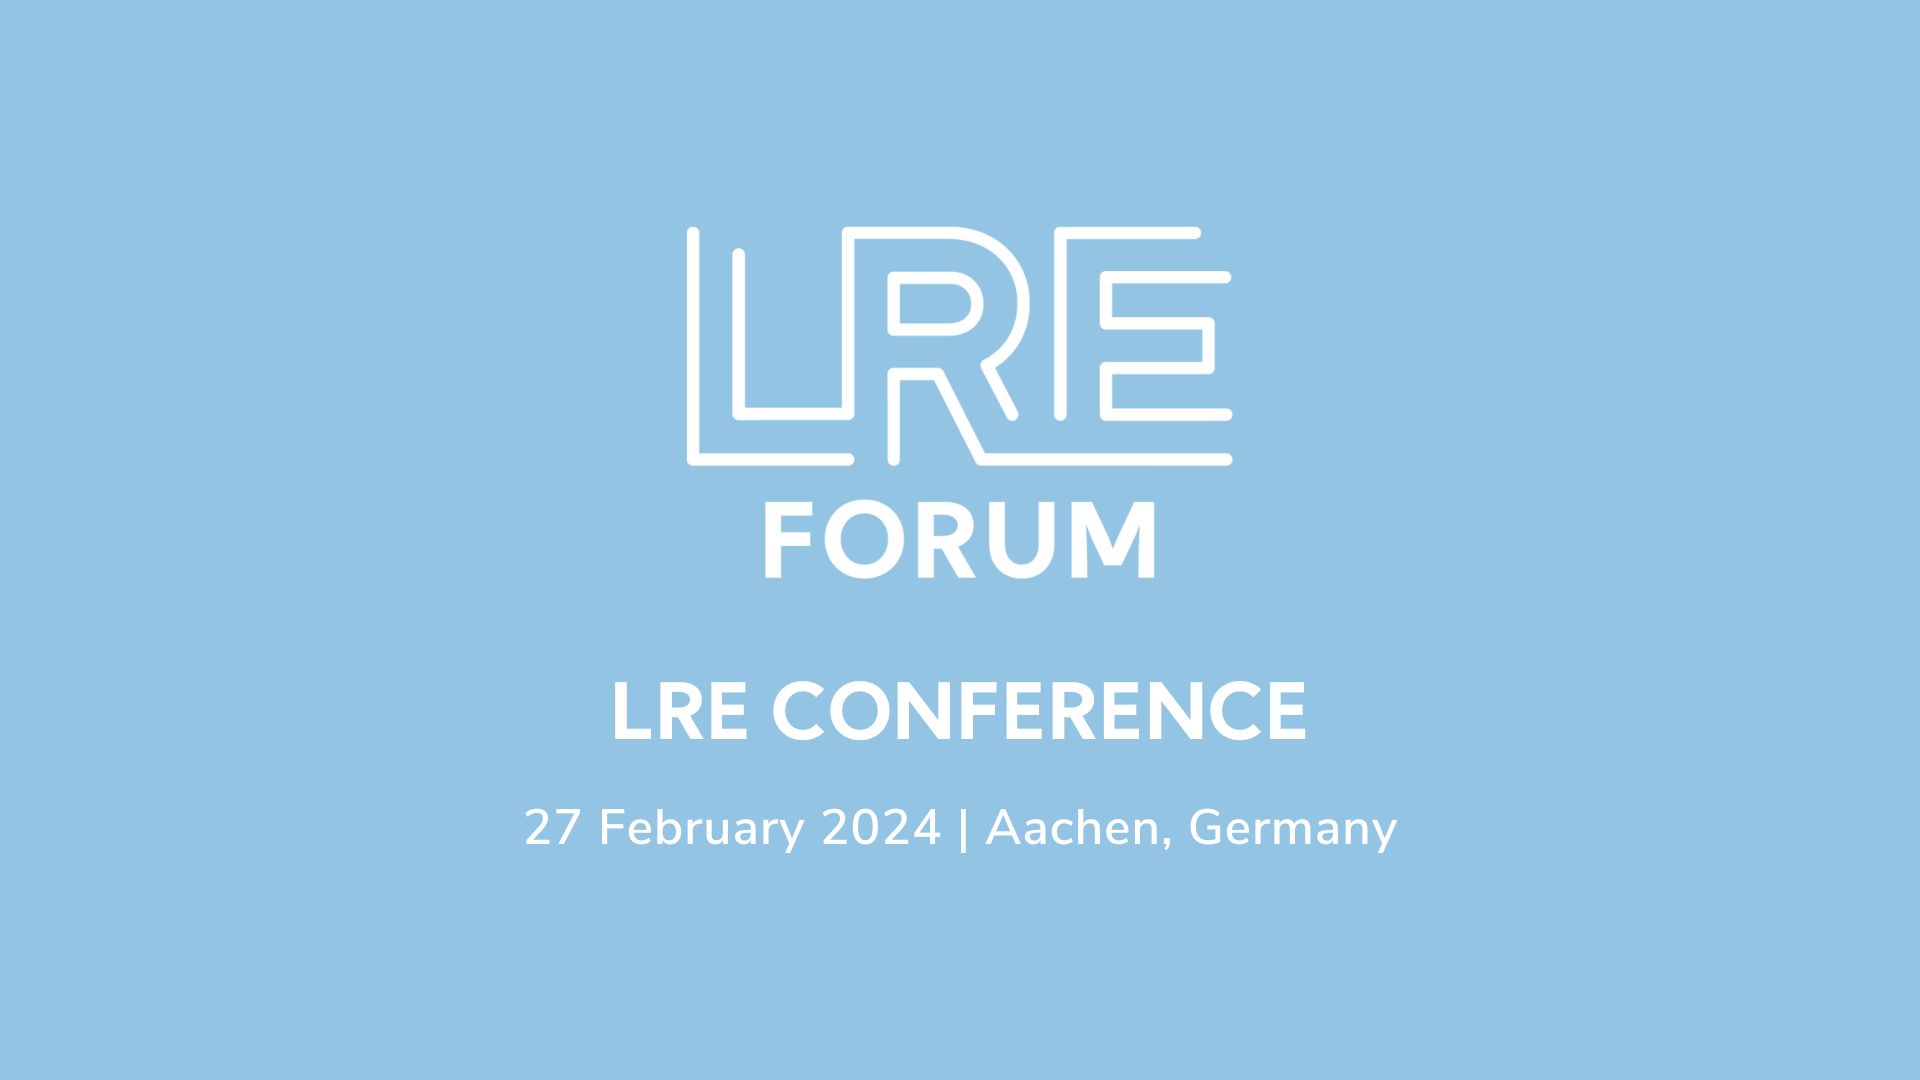 LRE Conference 2024 – an interview with LREF Managing Director Rémi Praud 